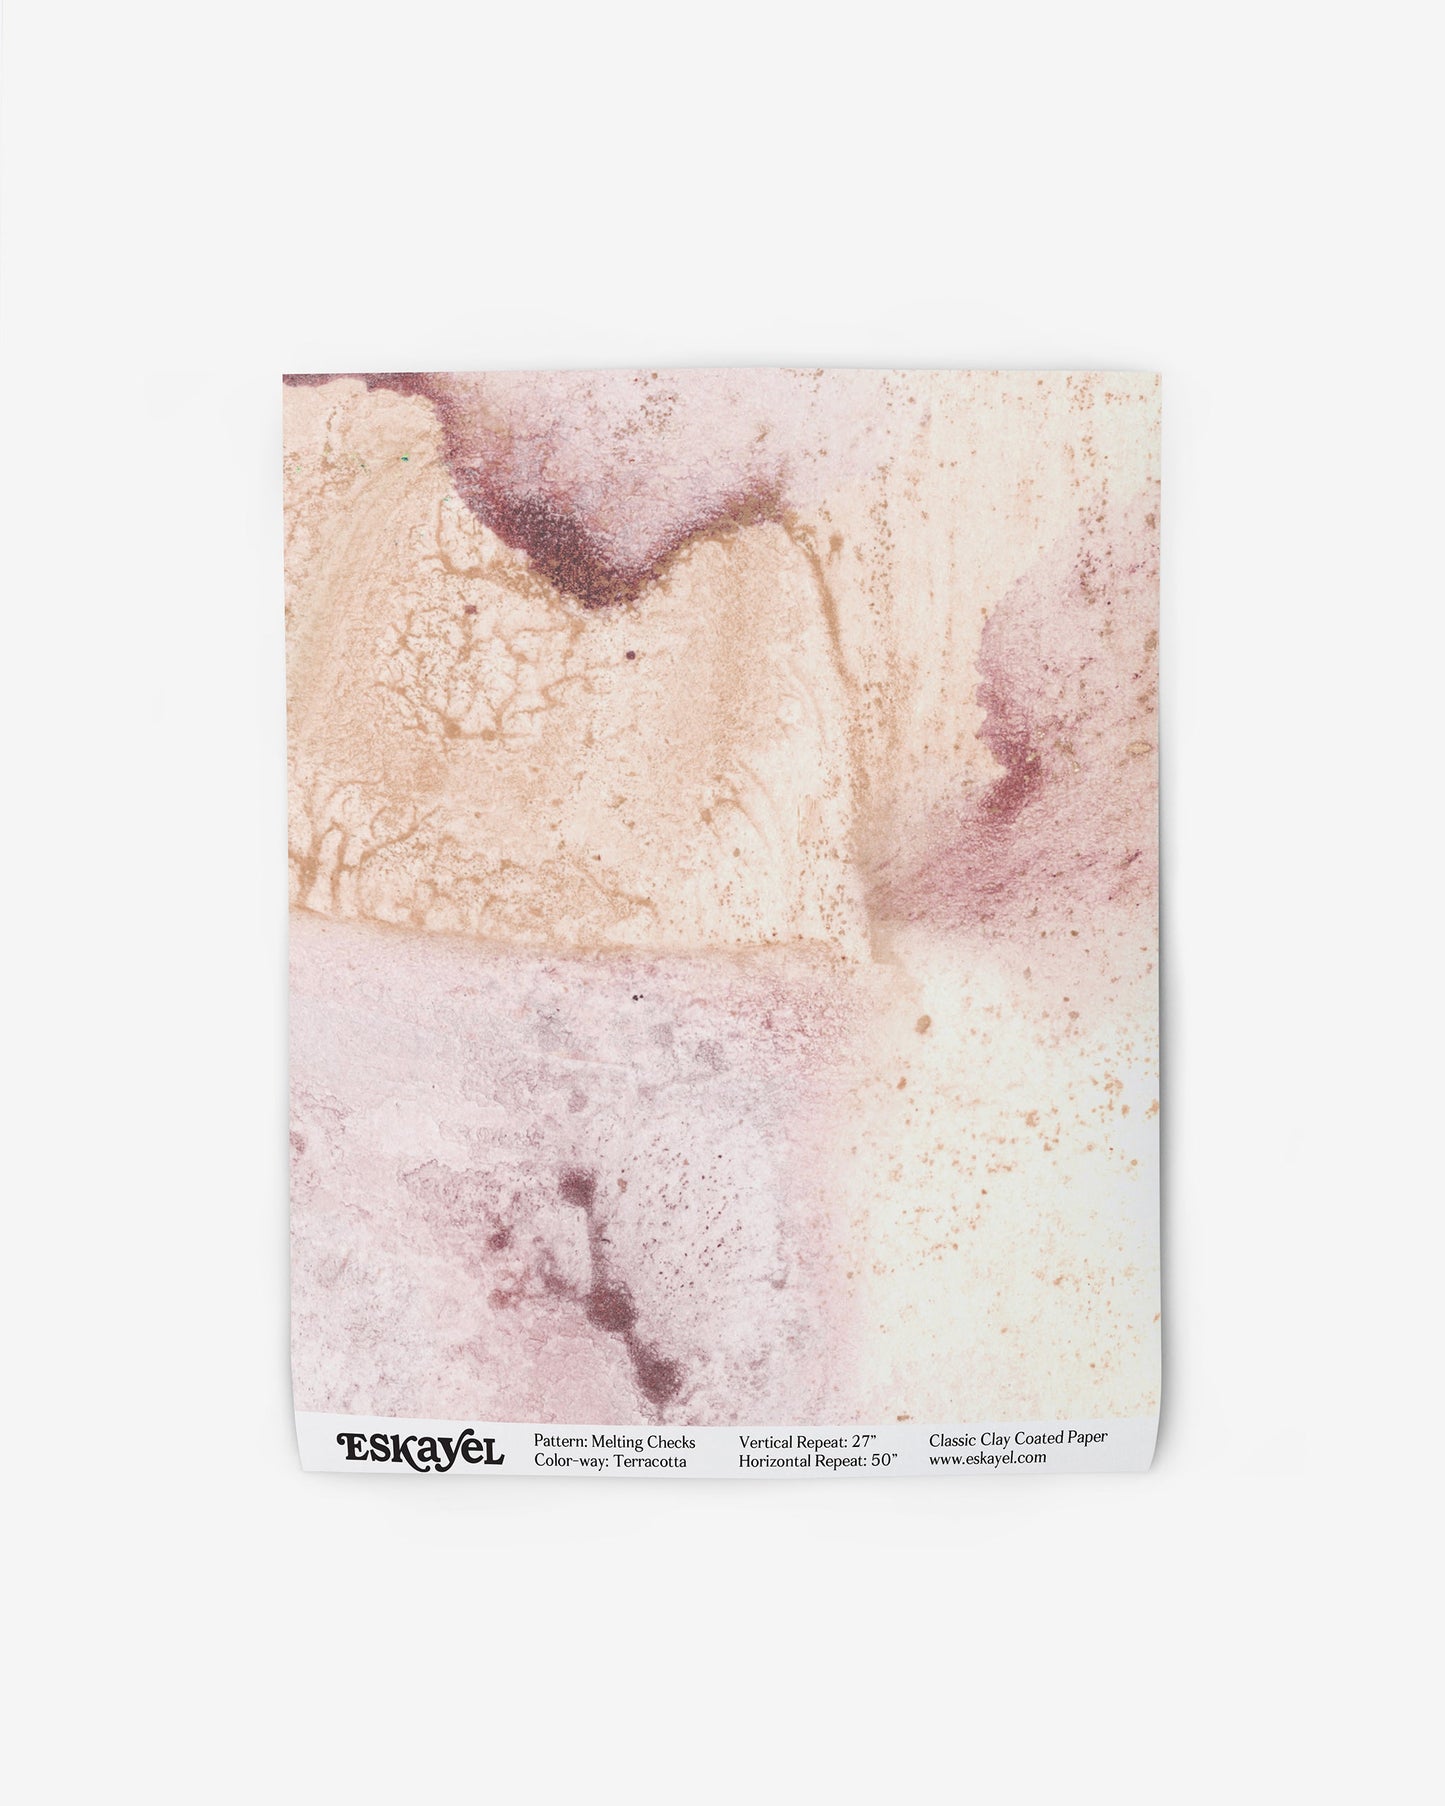 A pink and white Melting Checks Wallpaper with a marble pattern on it